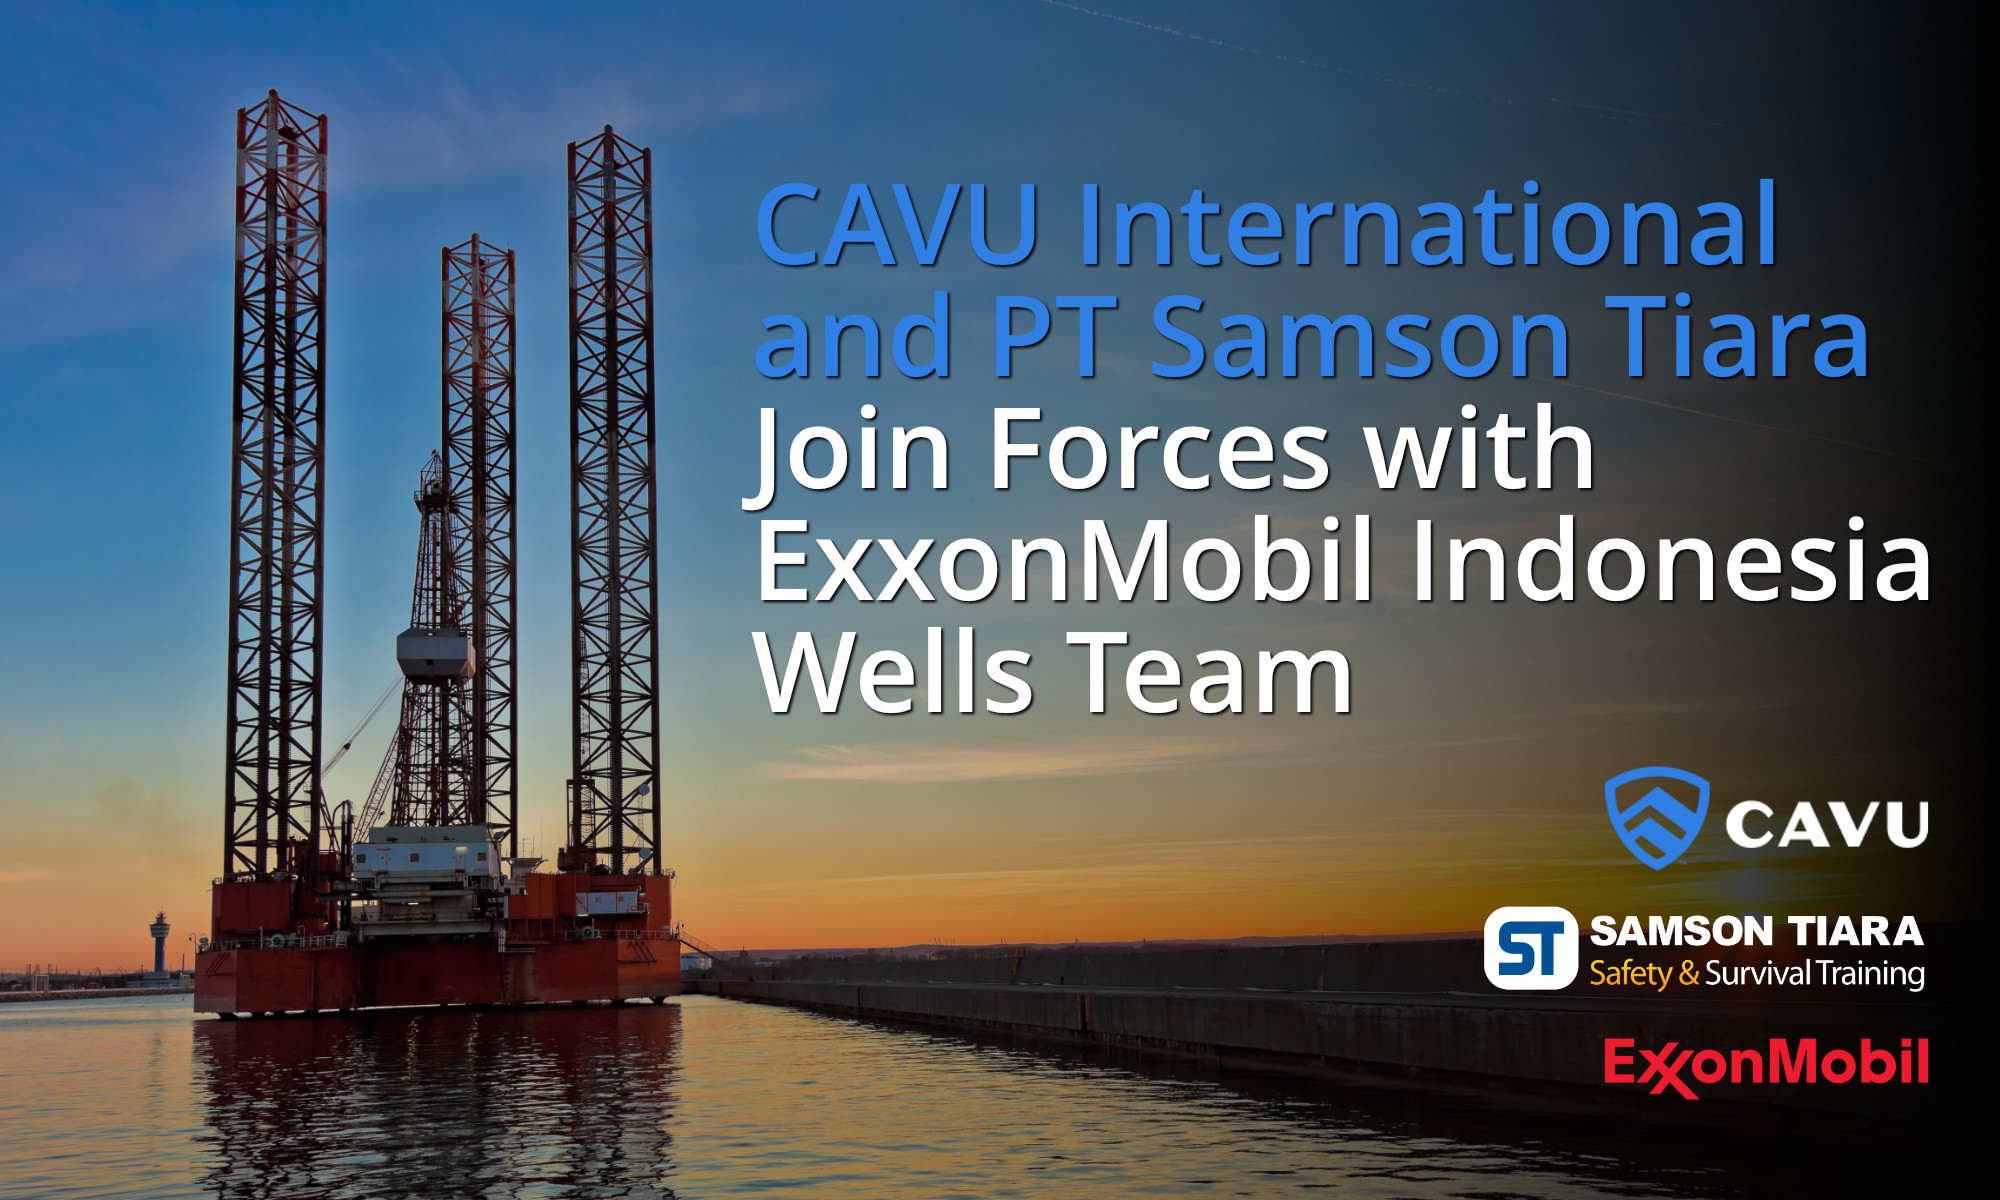 CAVU International And PT Samson Tiara Join Forces With ExxonMobil Indonesia Wells Team For Groundbreaking Human Performance Safety Leadership Program